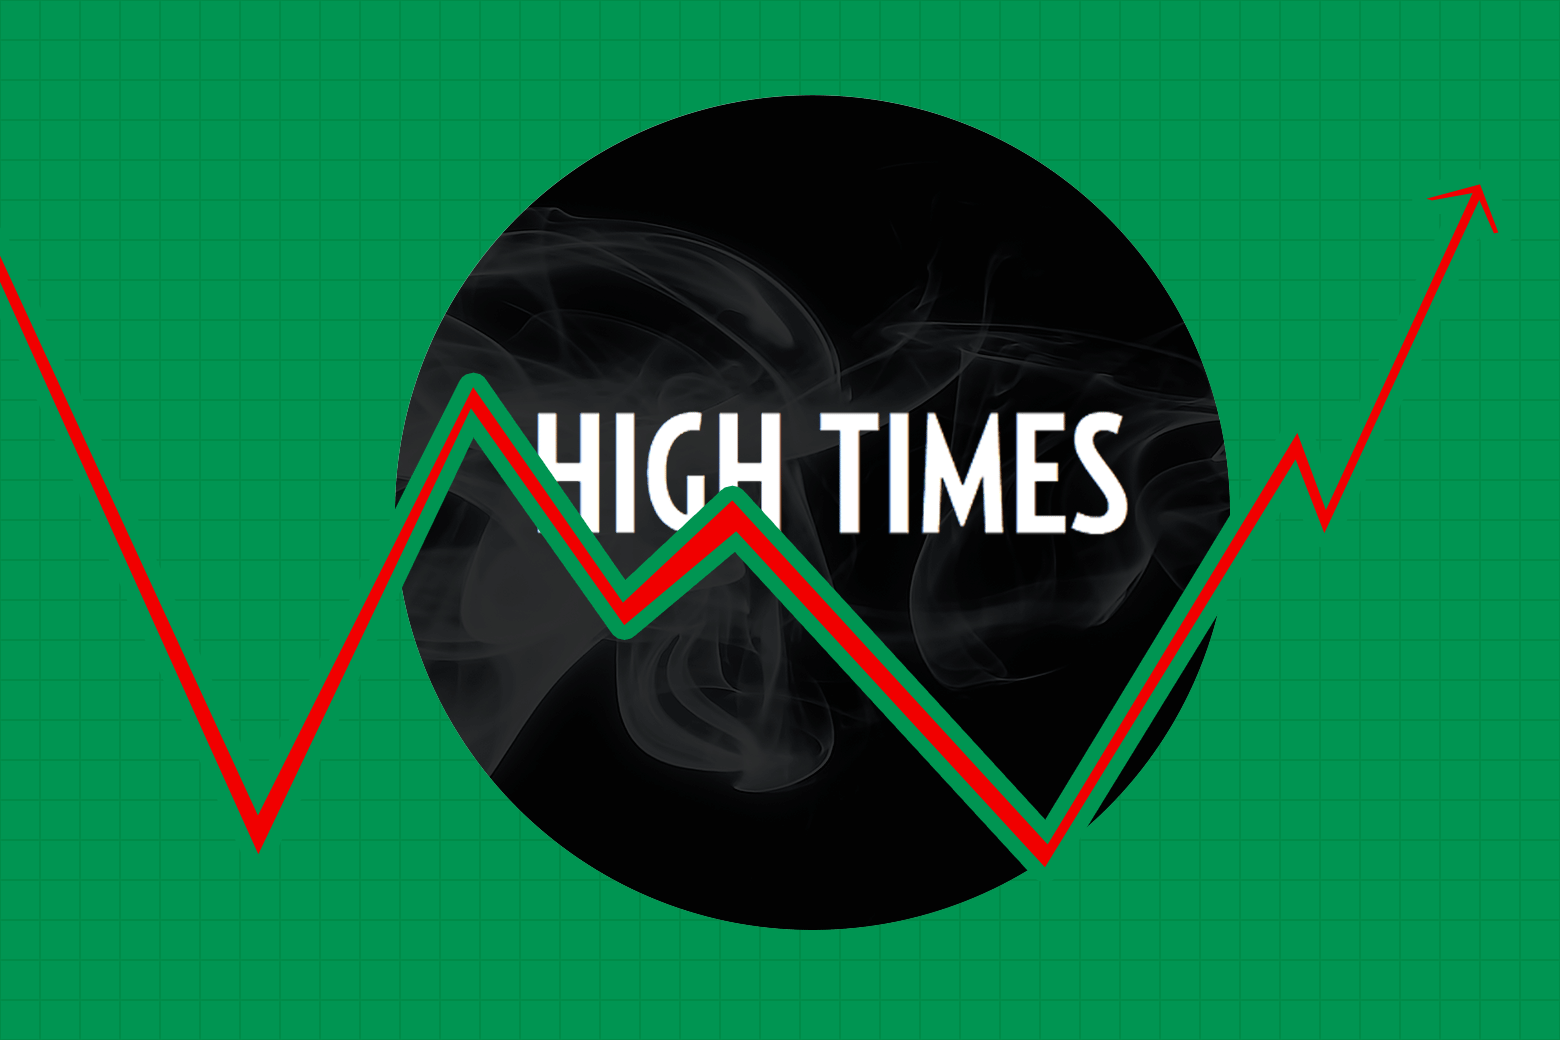 The High Times logo in a wisp of smoke